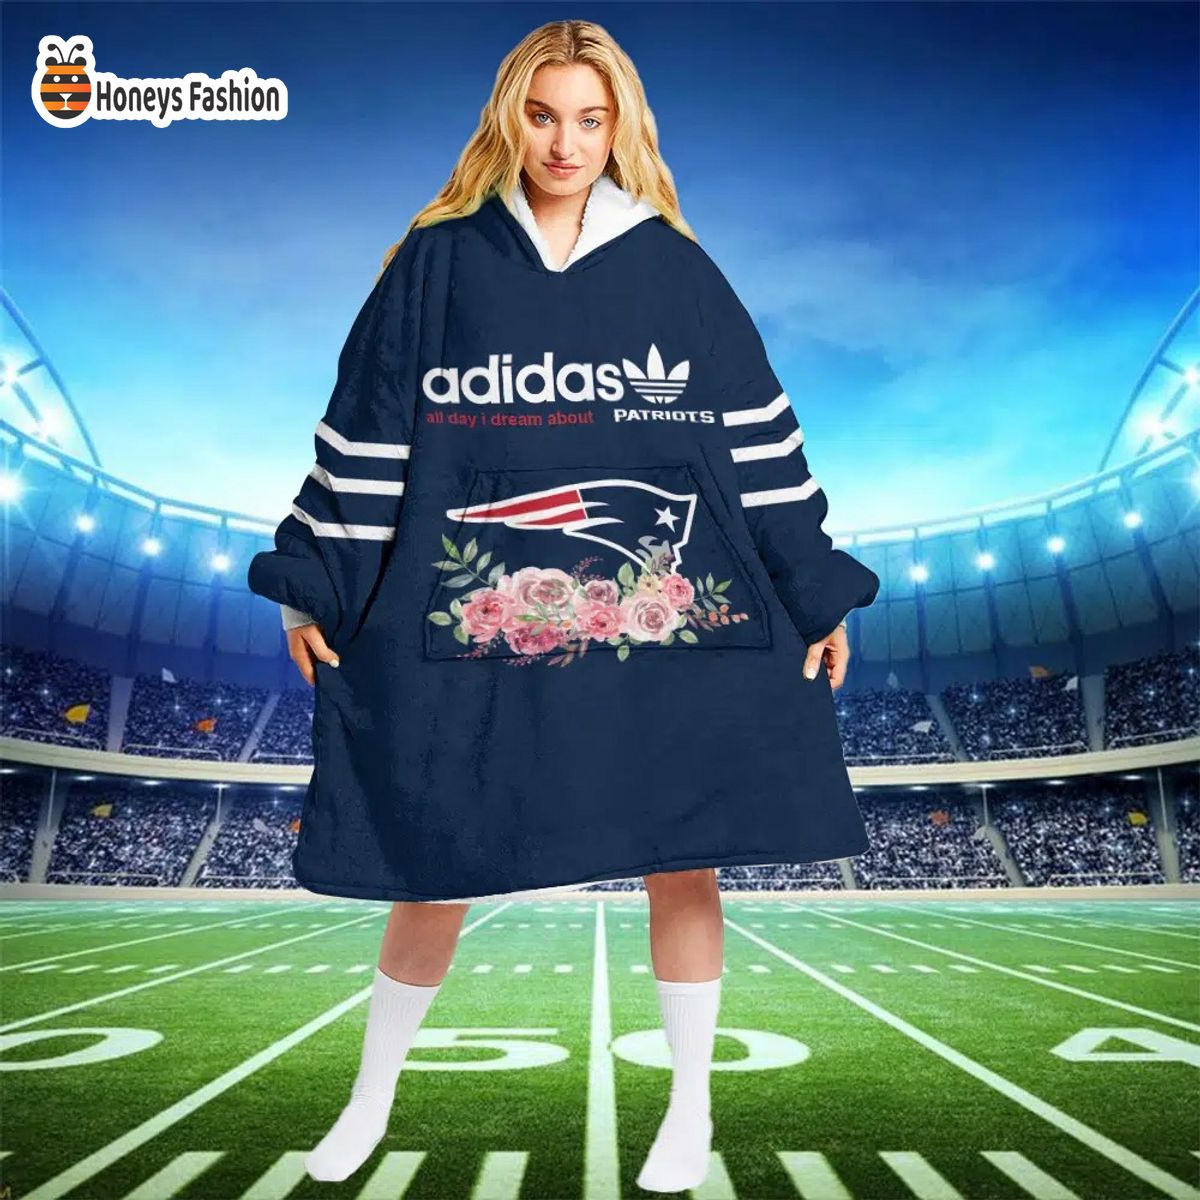 New England Patriots NFL Adidas all day i dream about Patriots blanket hoodie